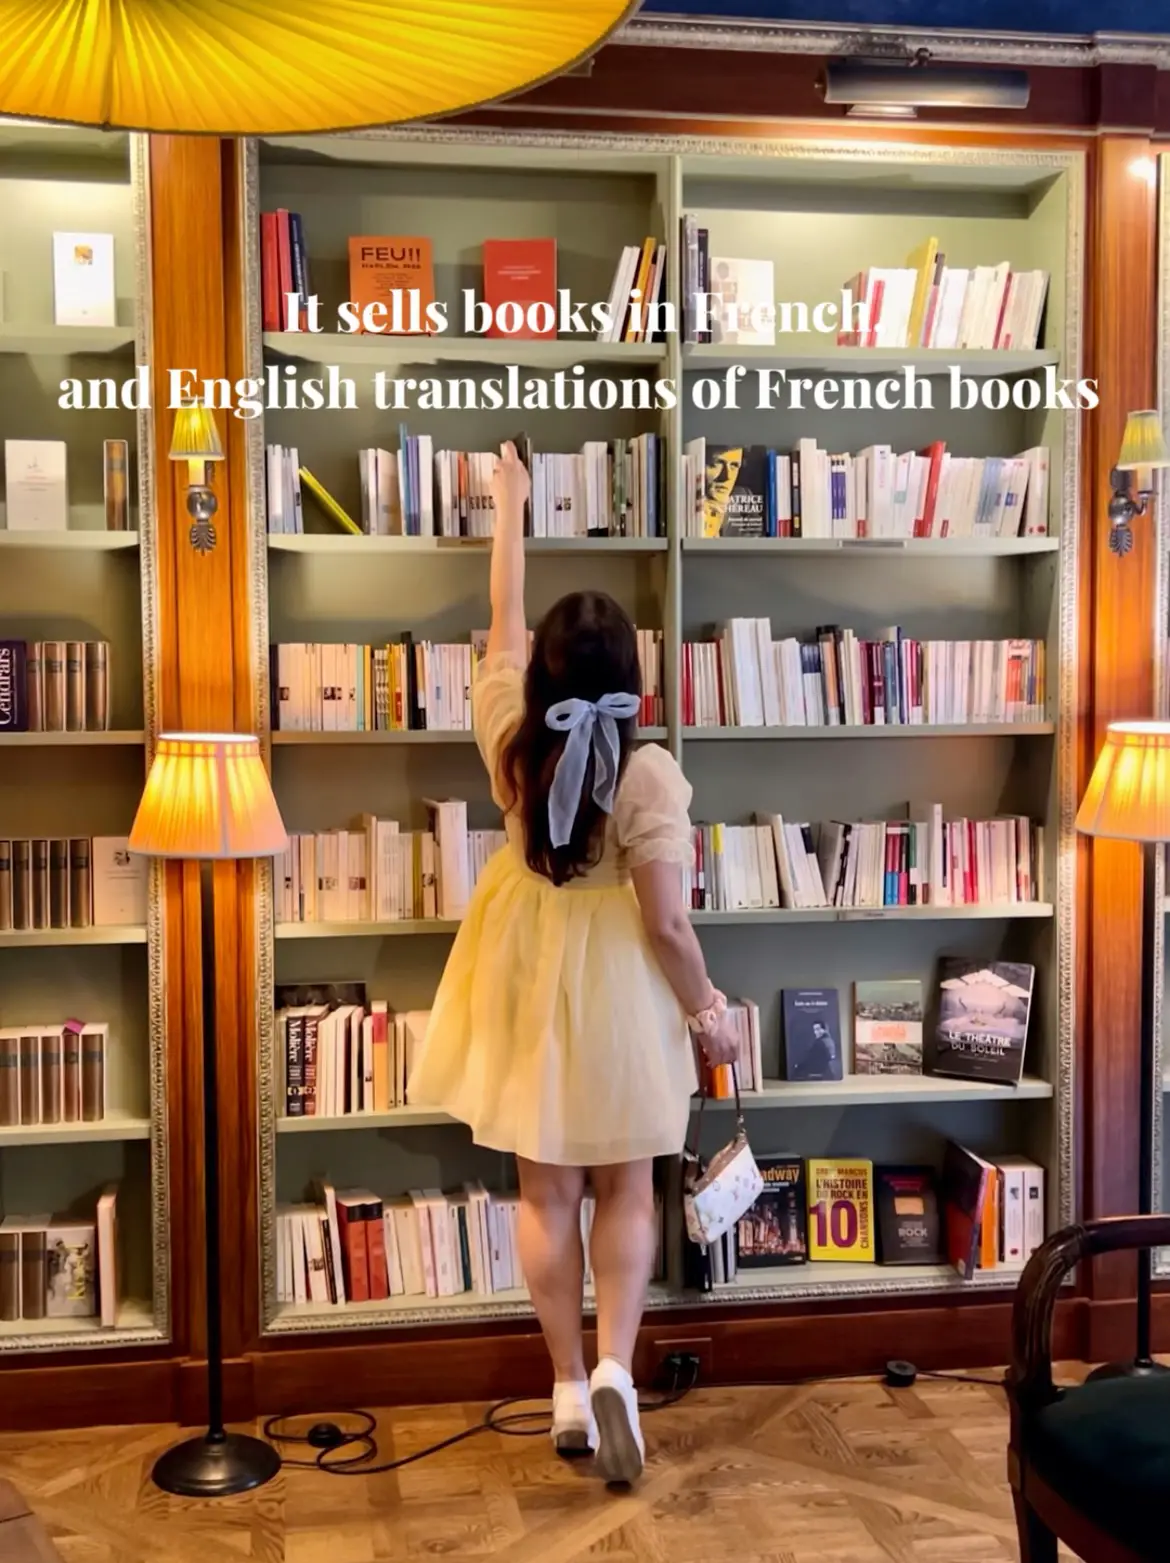  A young girl is standing in a bookshelf with a French flag on the wall. The shelf is filled with books in both English and French translations of French books.